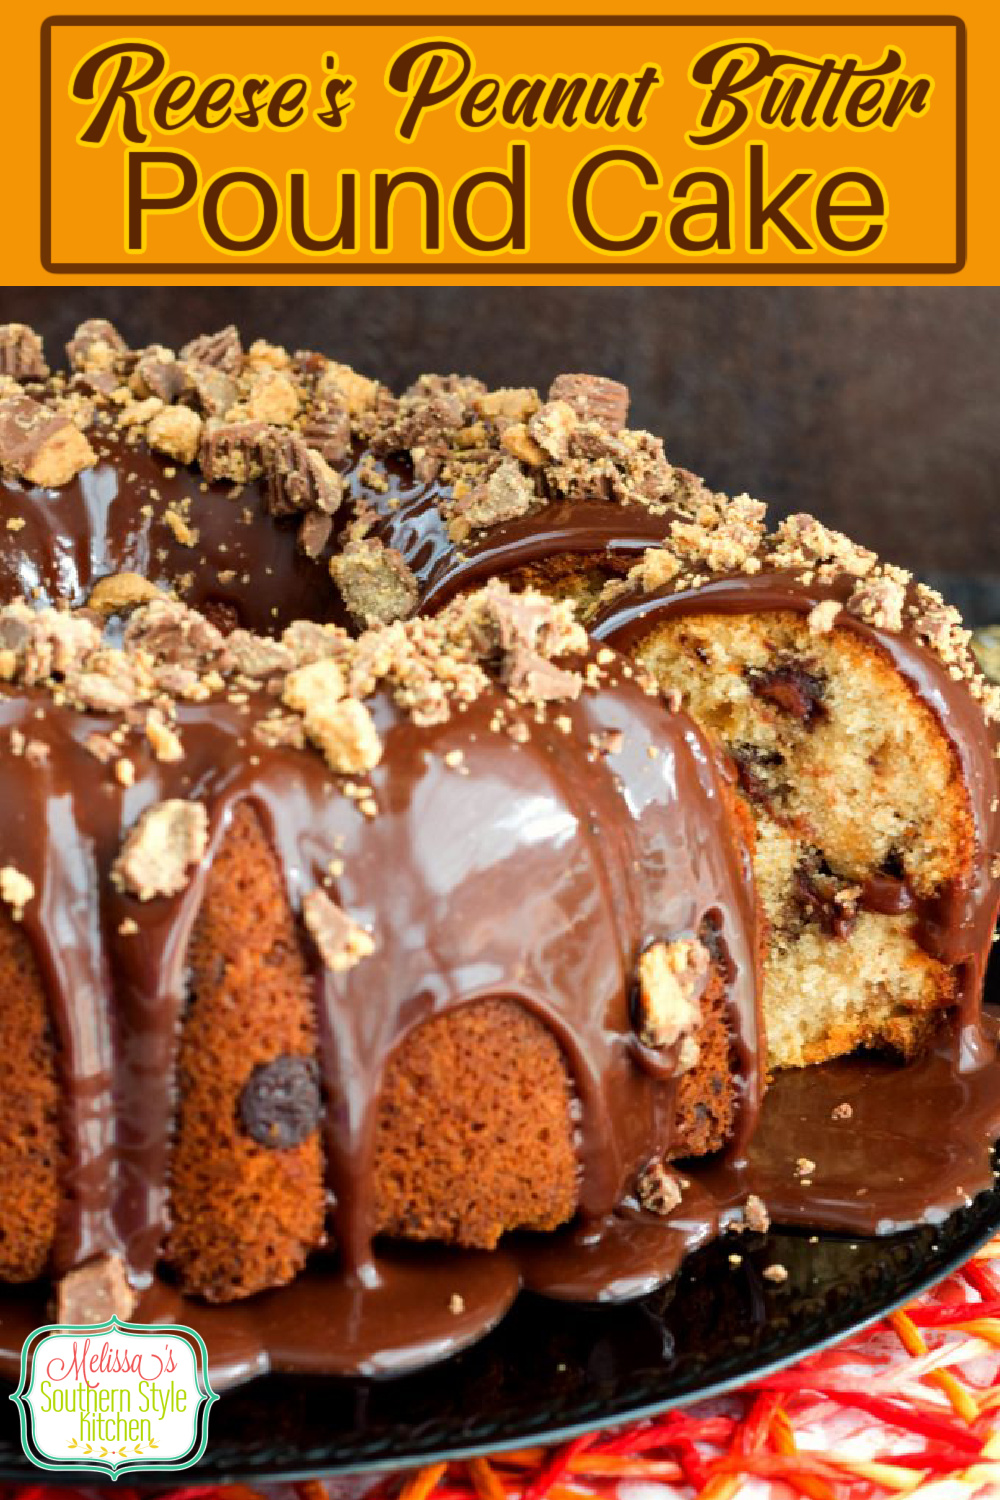 Peanut butter cups and pound cake collide in this delectable chocolate drizzled Reese's Peanut Butter Pound Cake #reesescups #reesescake #reesespoundcake #cakerecipes #poundcake #peanutbutter #chocolate #cakerecipes #cake #holidaybaking #holidays #southernfood #southernrecipes